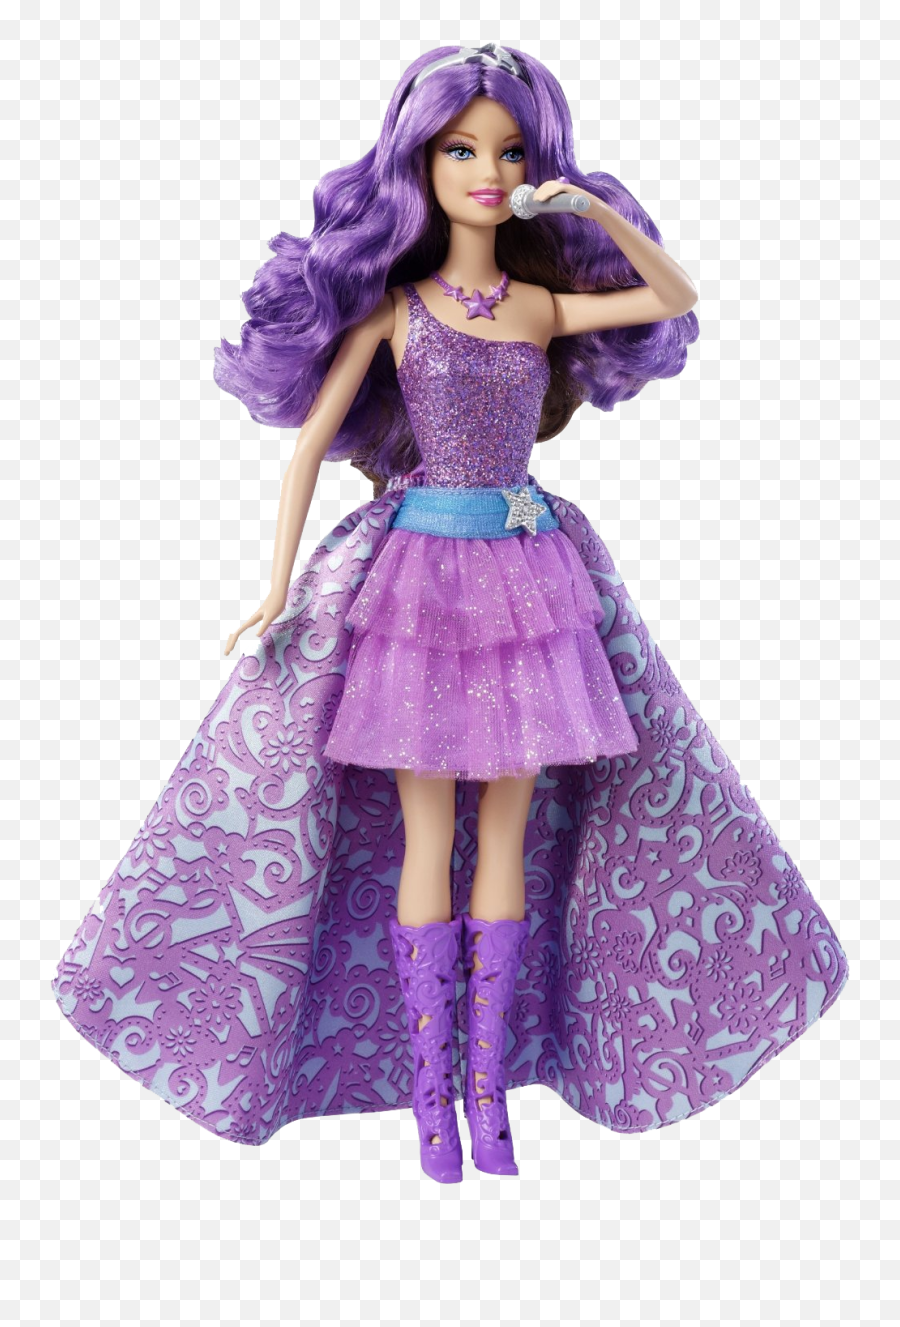 Barbie Doll Png Pic - Barbie The Princess And The Popstar Dolls,Doll Png